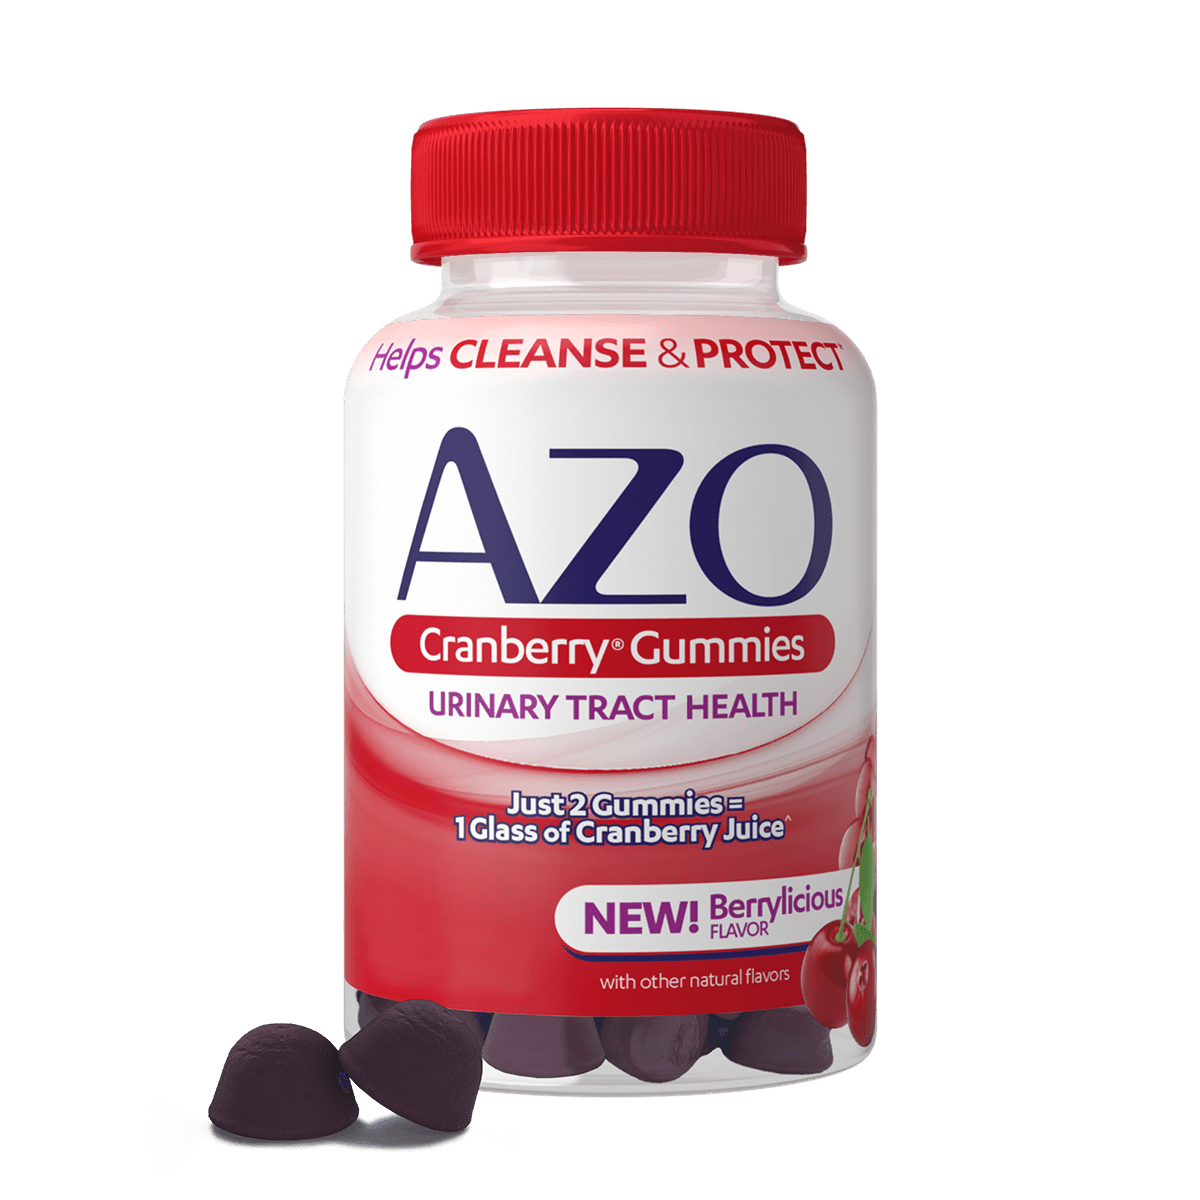 AZO cranberry gummies bottle and gummy size